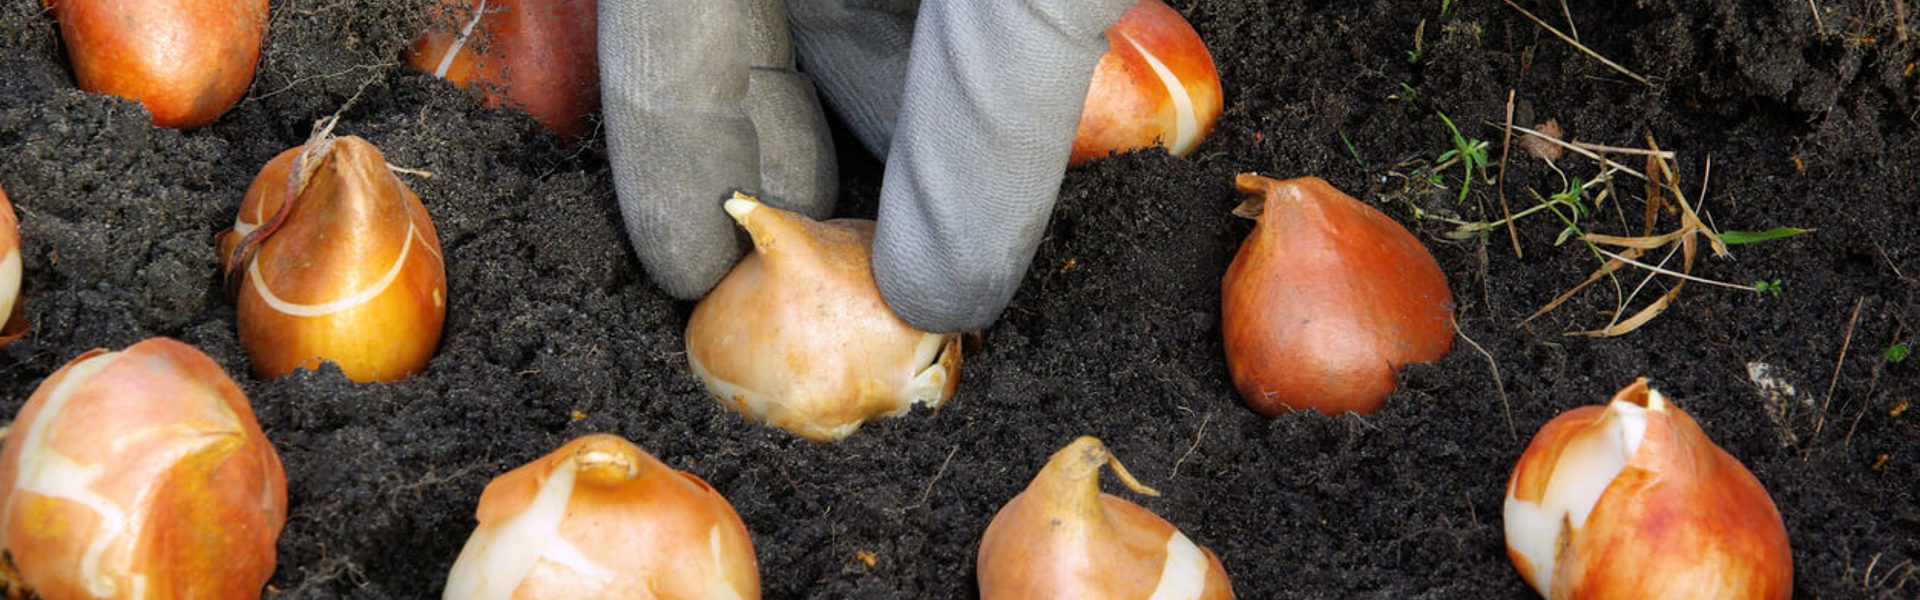 A close up of someone wearing gardening gloves and planting bulbs in soil